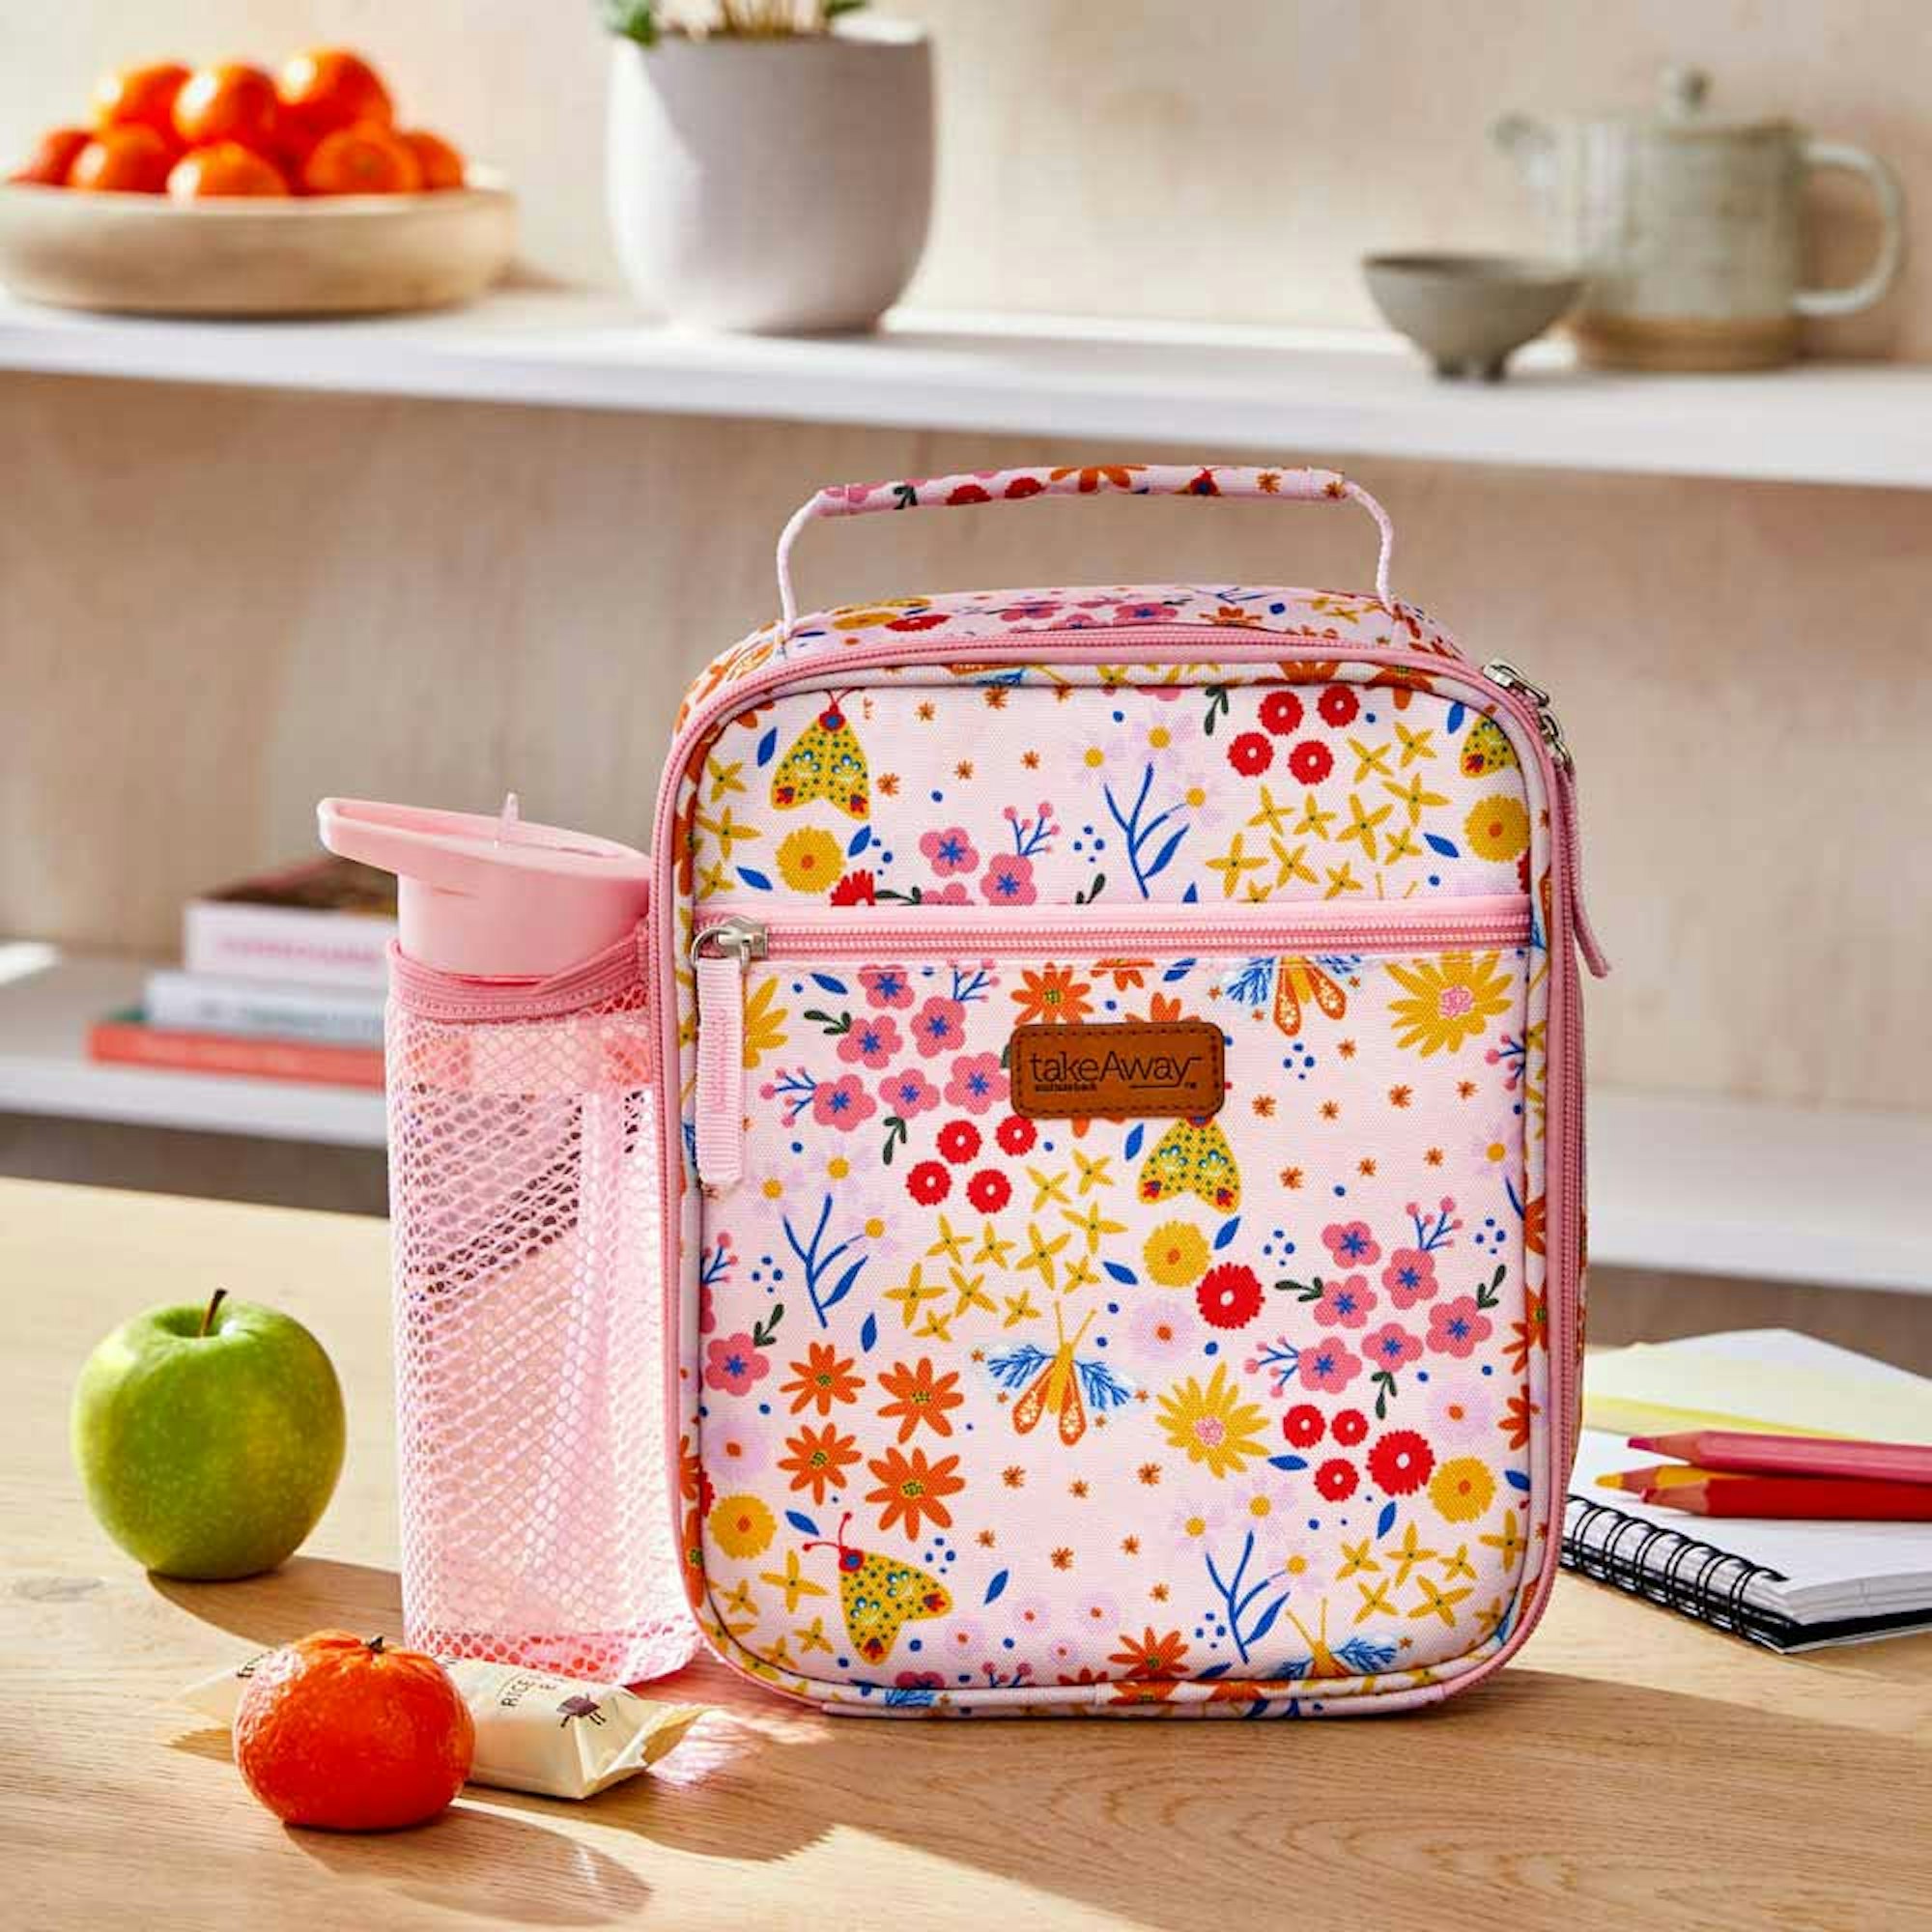 Takeaway Out Lunch bag set. Your Guide to Back to School preparation. Pink and floral lunch bag with drink bottle on the kitchen counter with fruit and books.